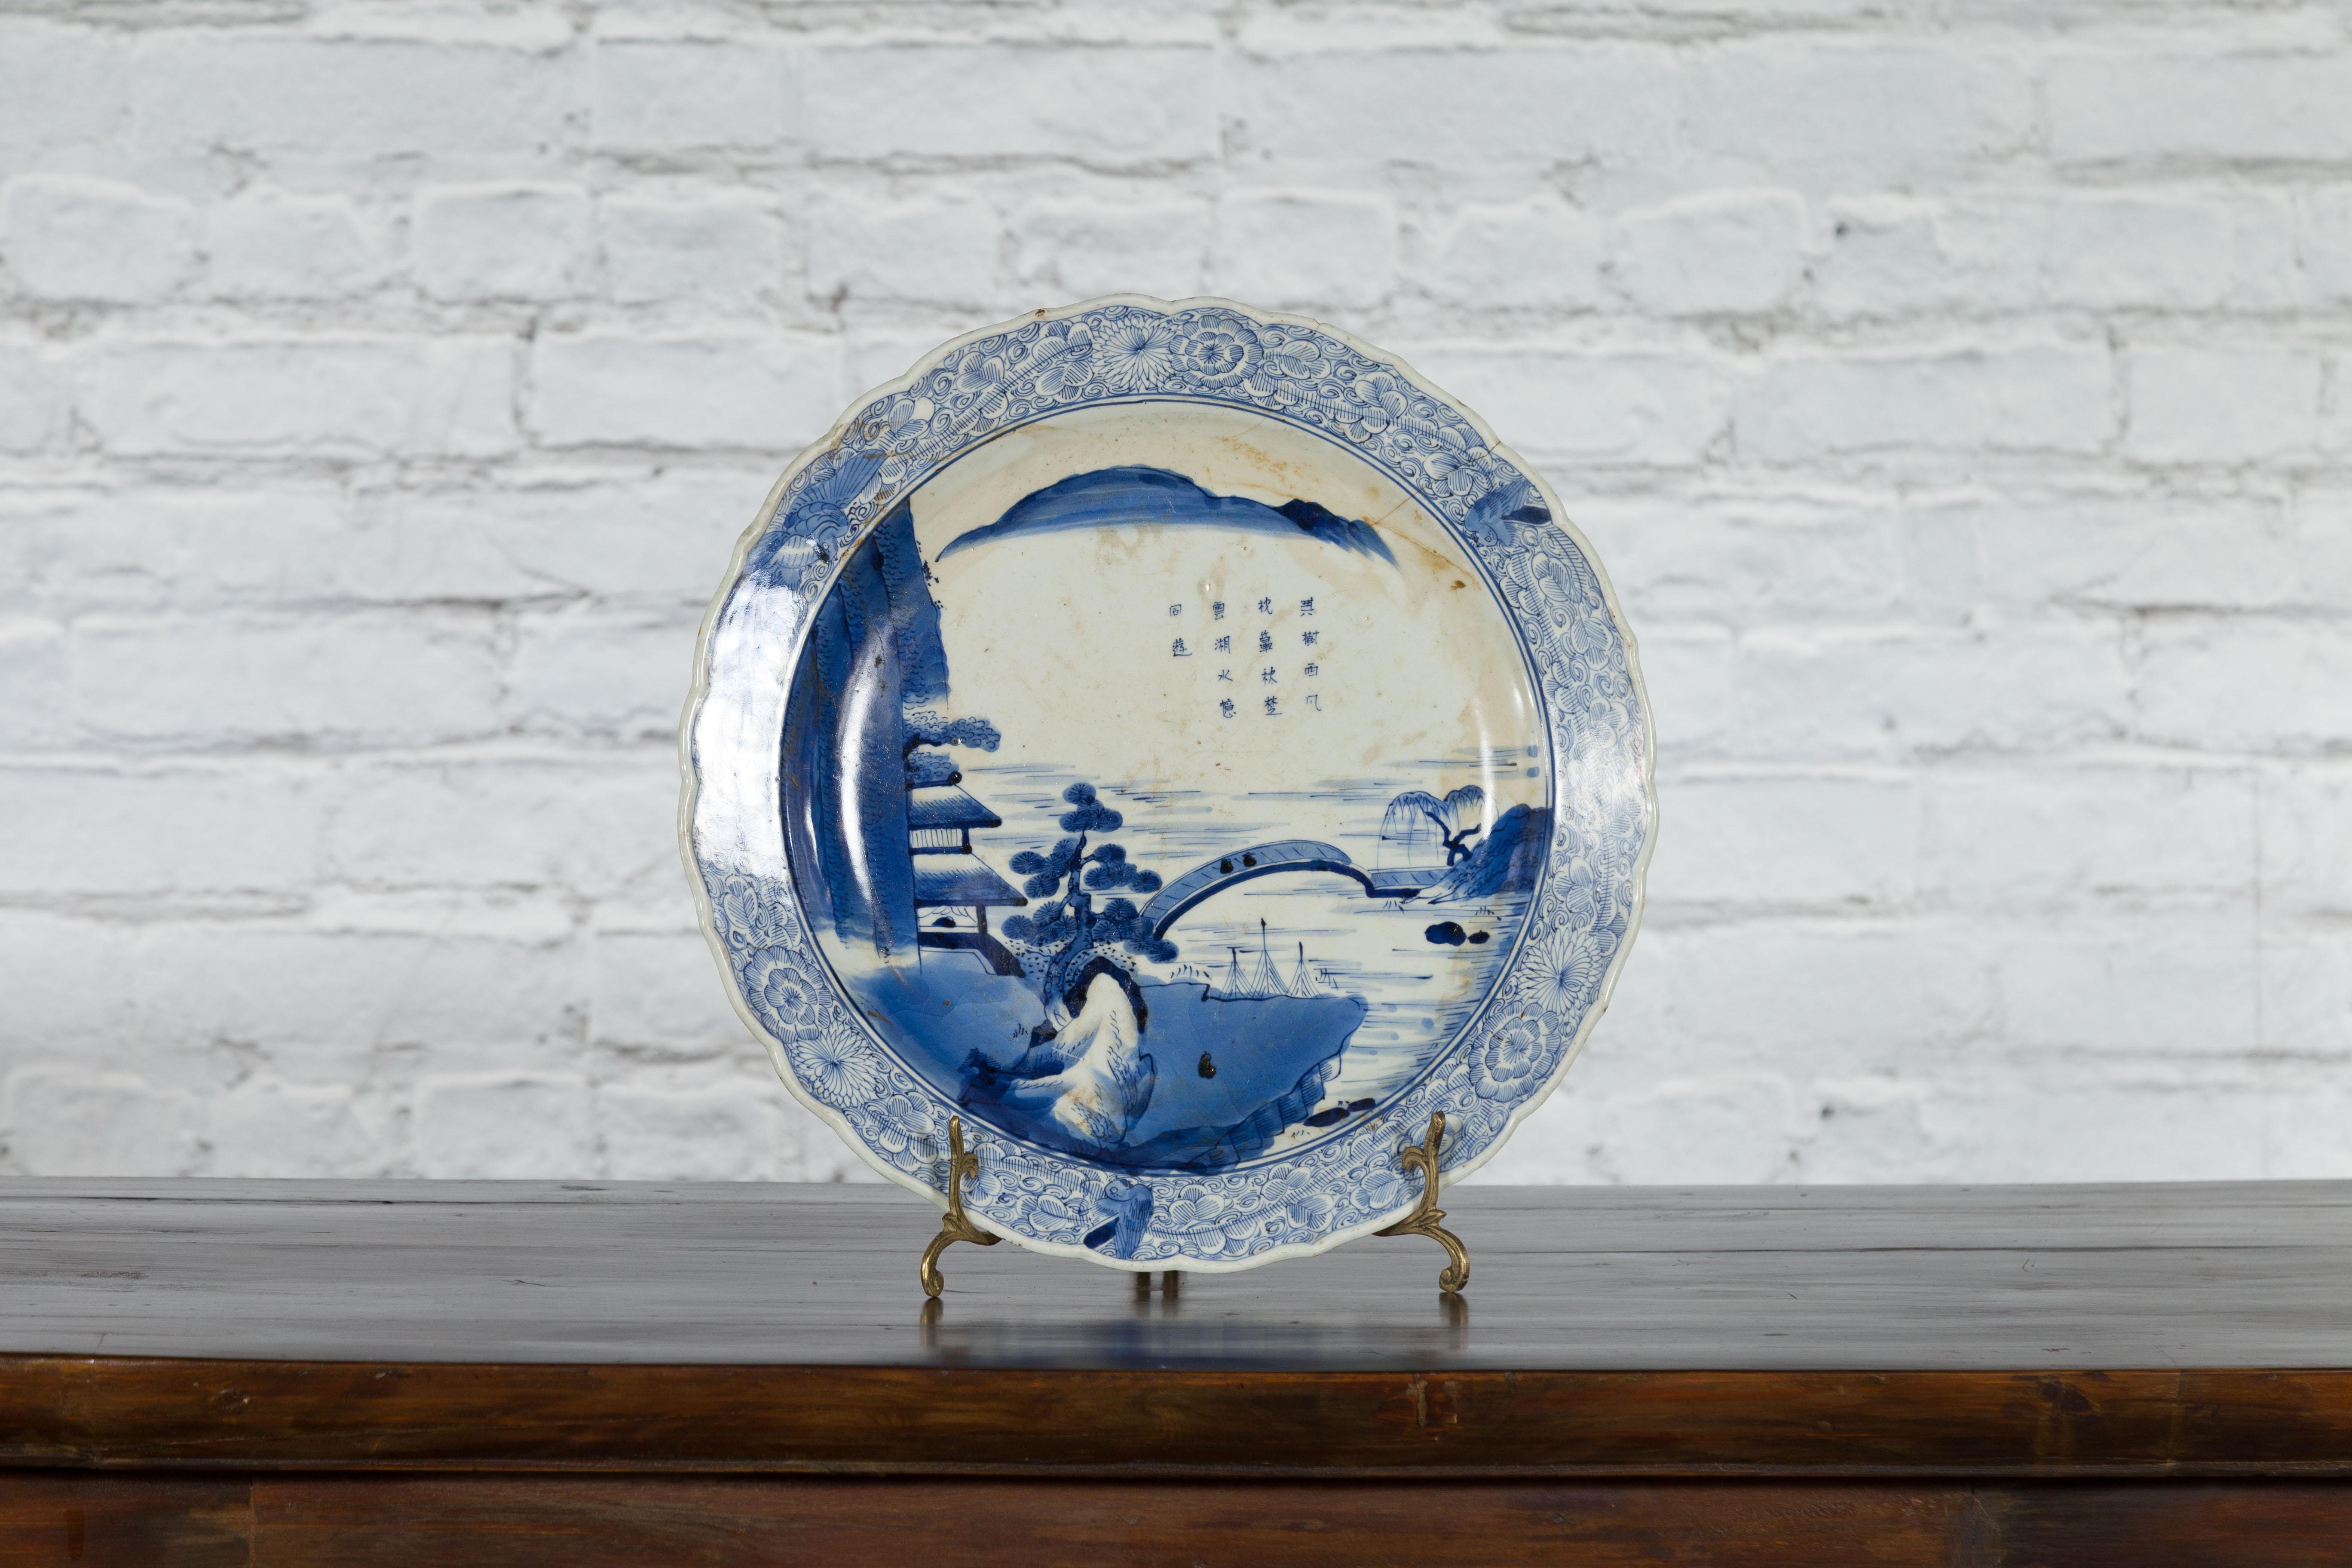 19th Century Japanese Porcelain Imari Plate with Painted Blue and White Décor In Good Condition For Sale In Yonkers, NY